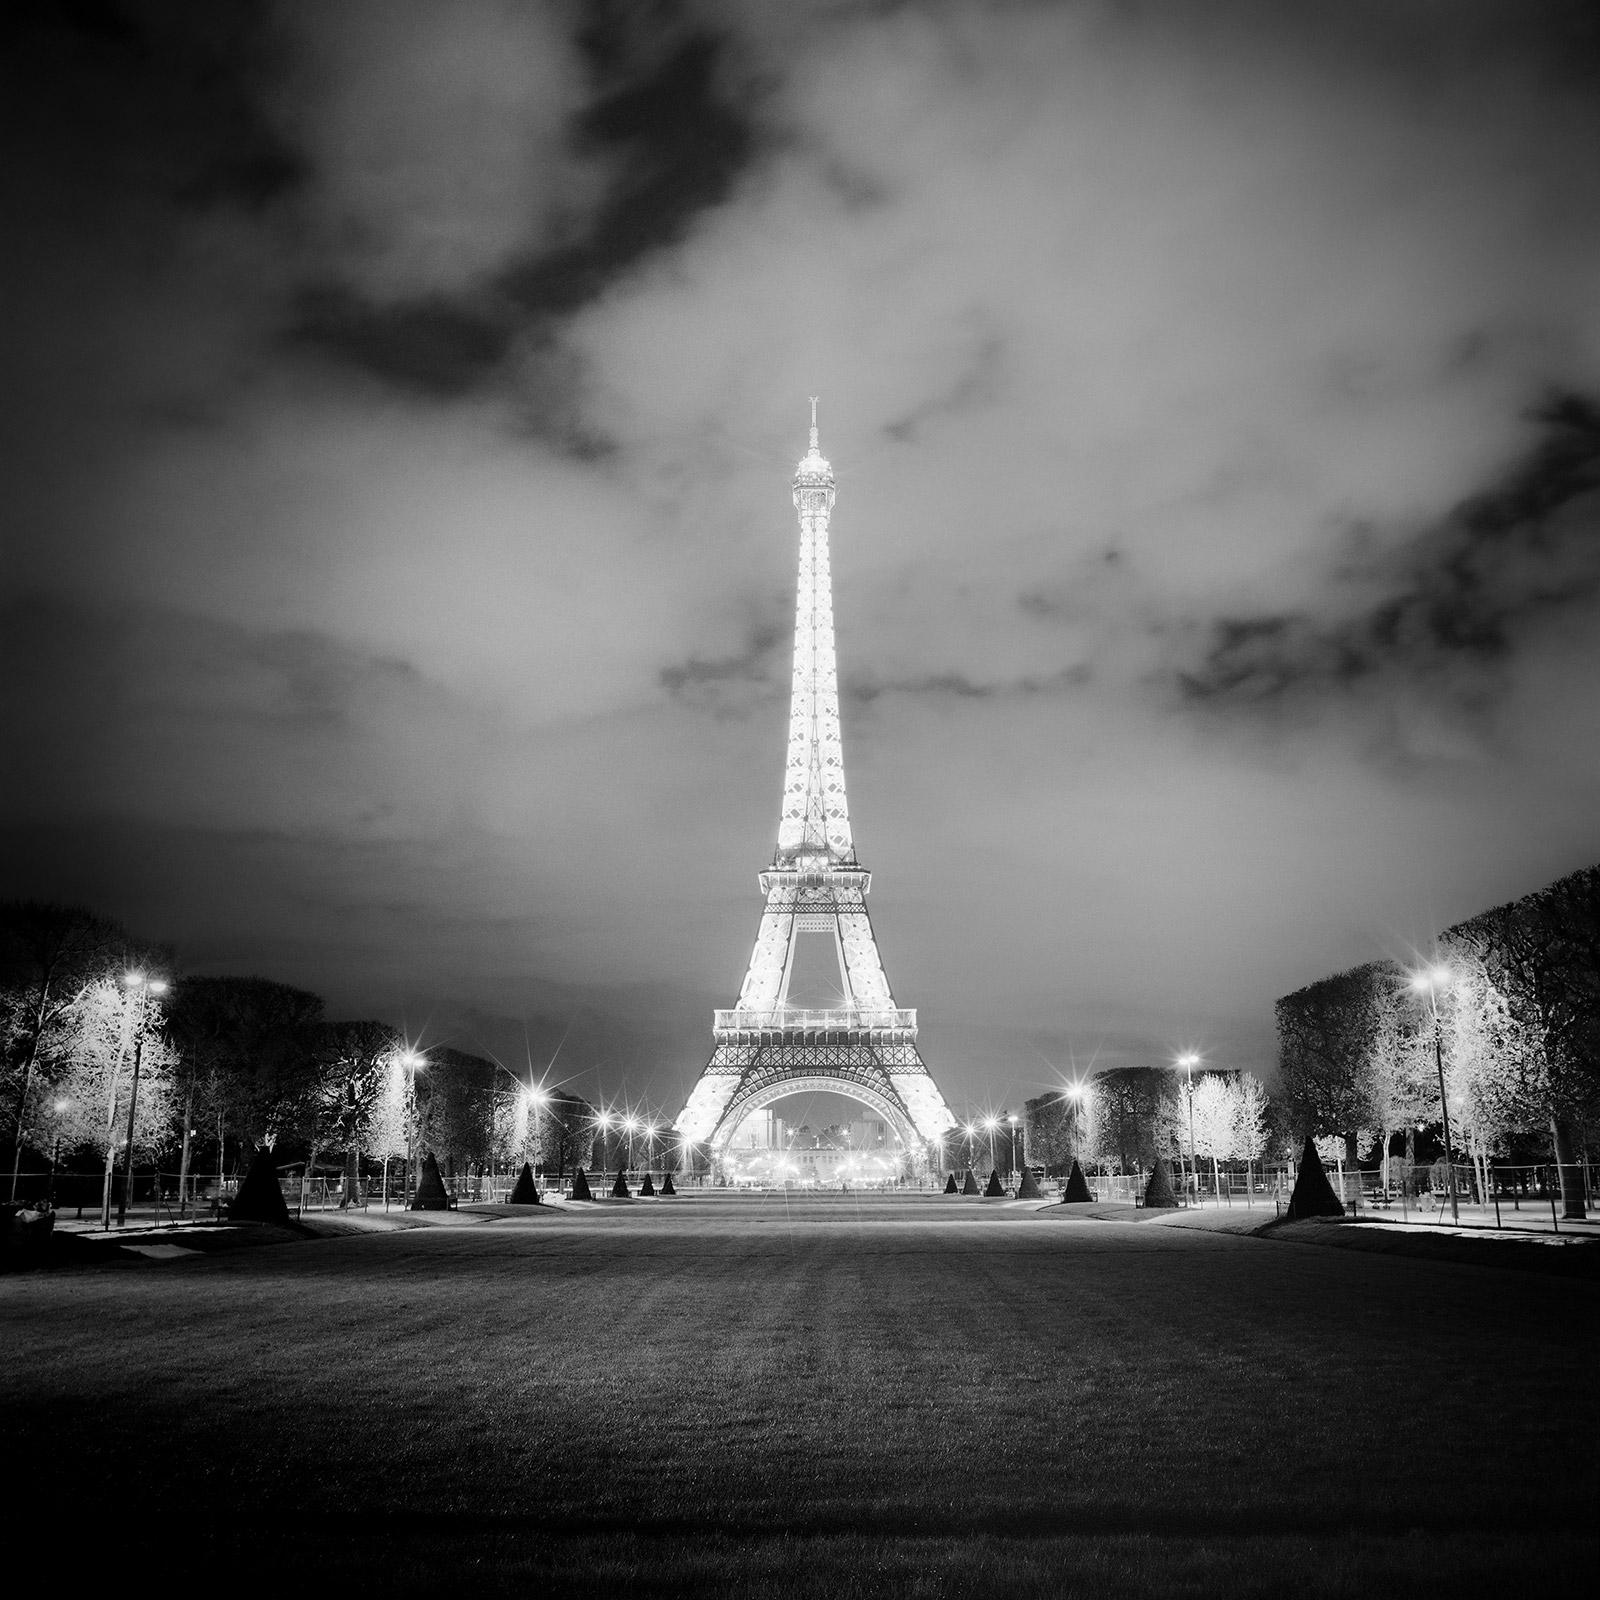 Eiffel Tower, Night, Paris, light show, black and white photography, cityscape